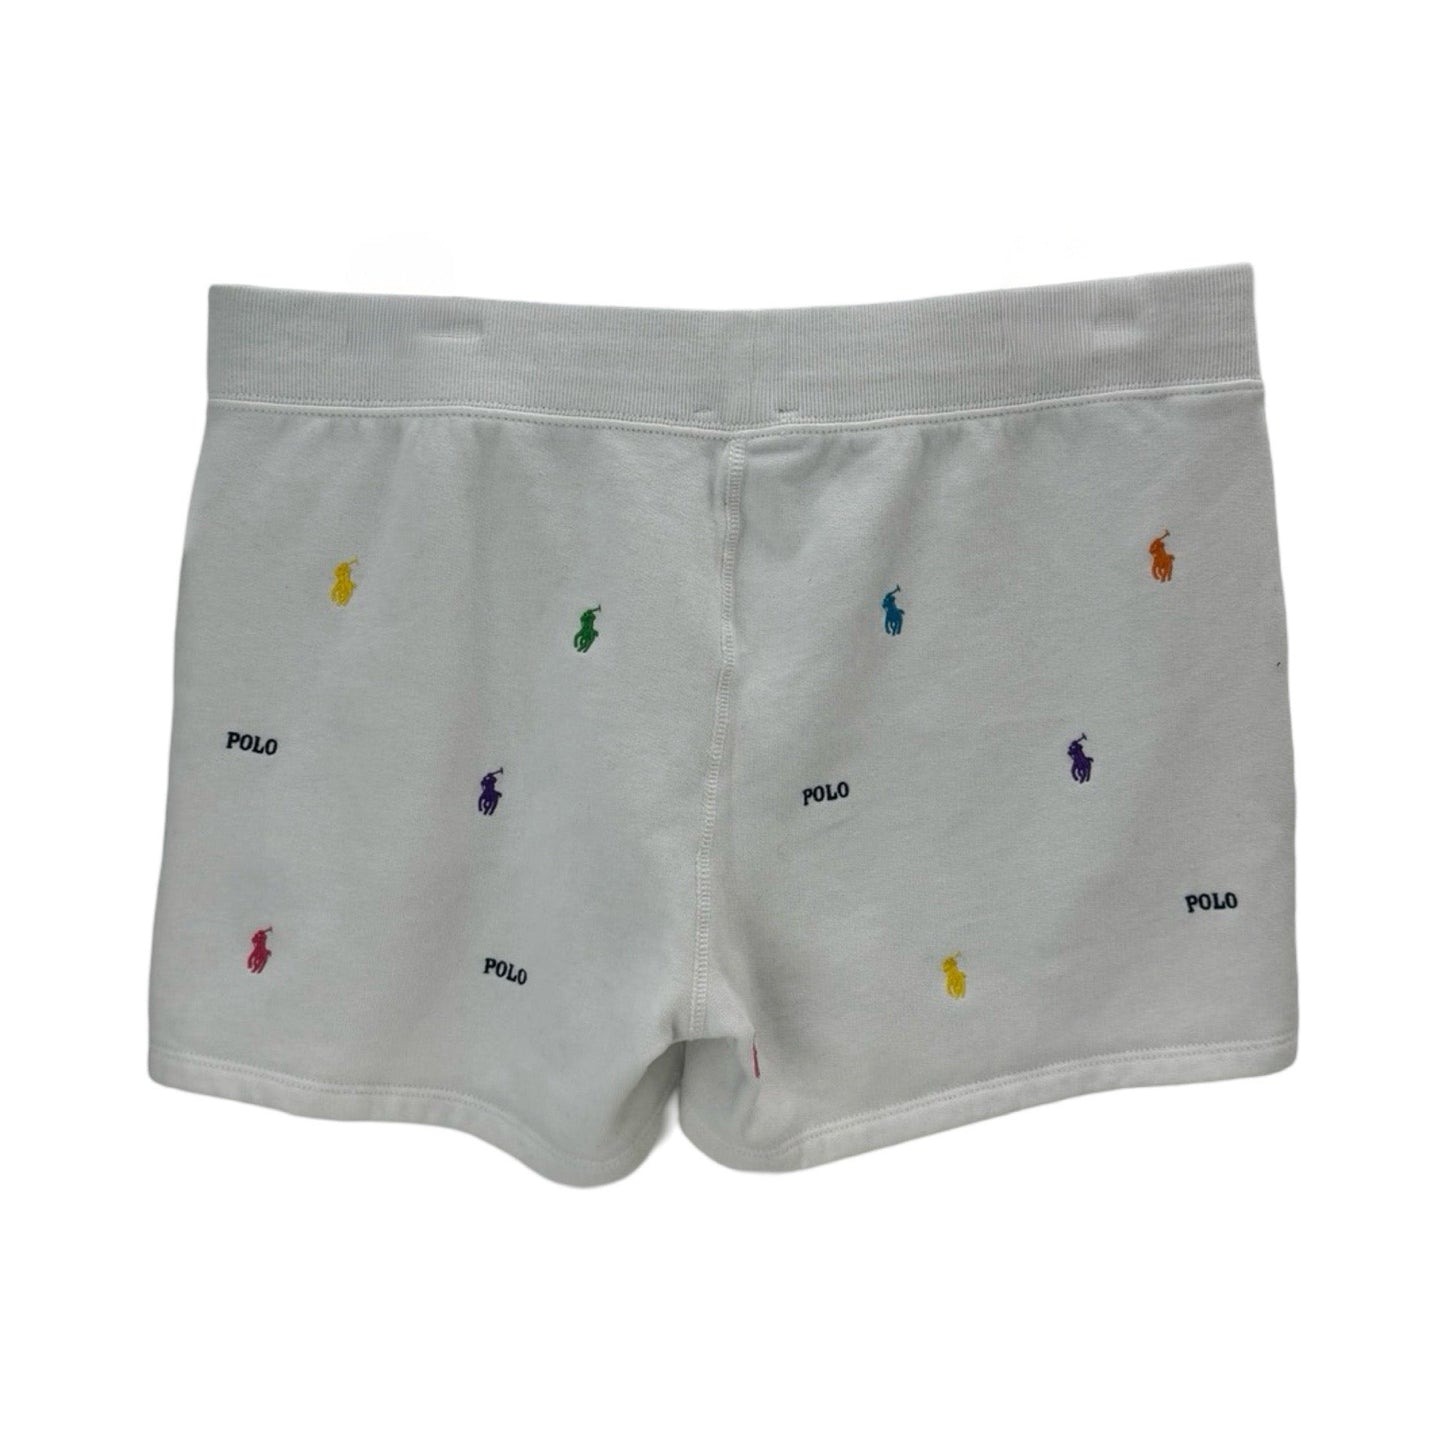 Shorts By Polo Ralph Lauren  Size: M